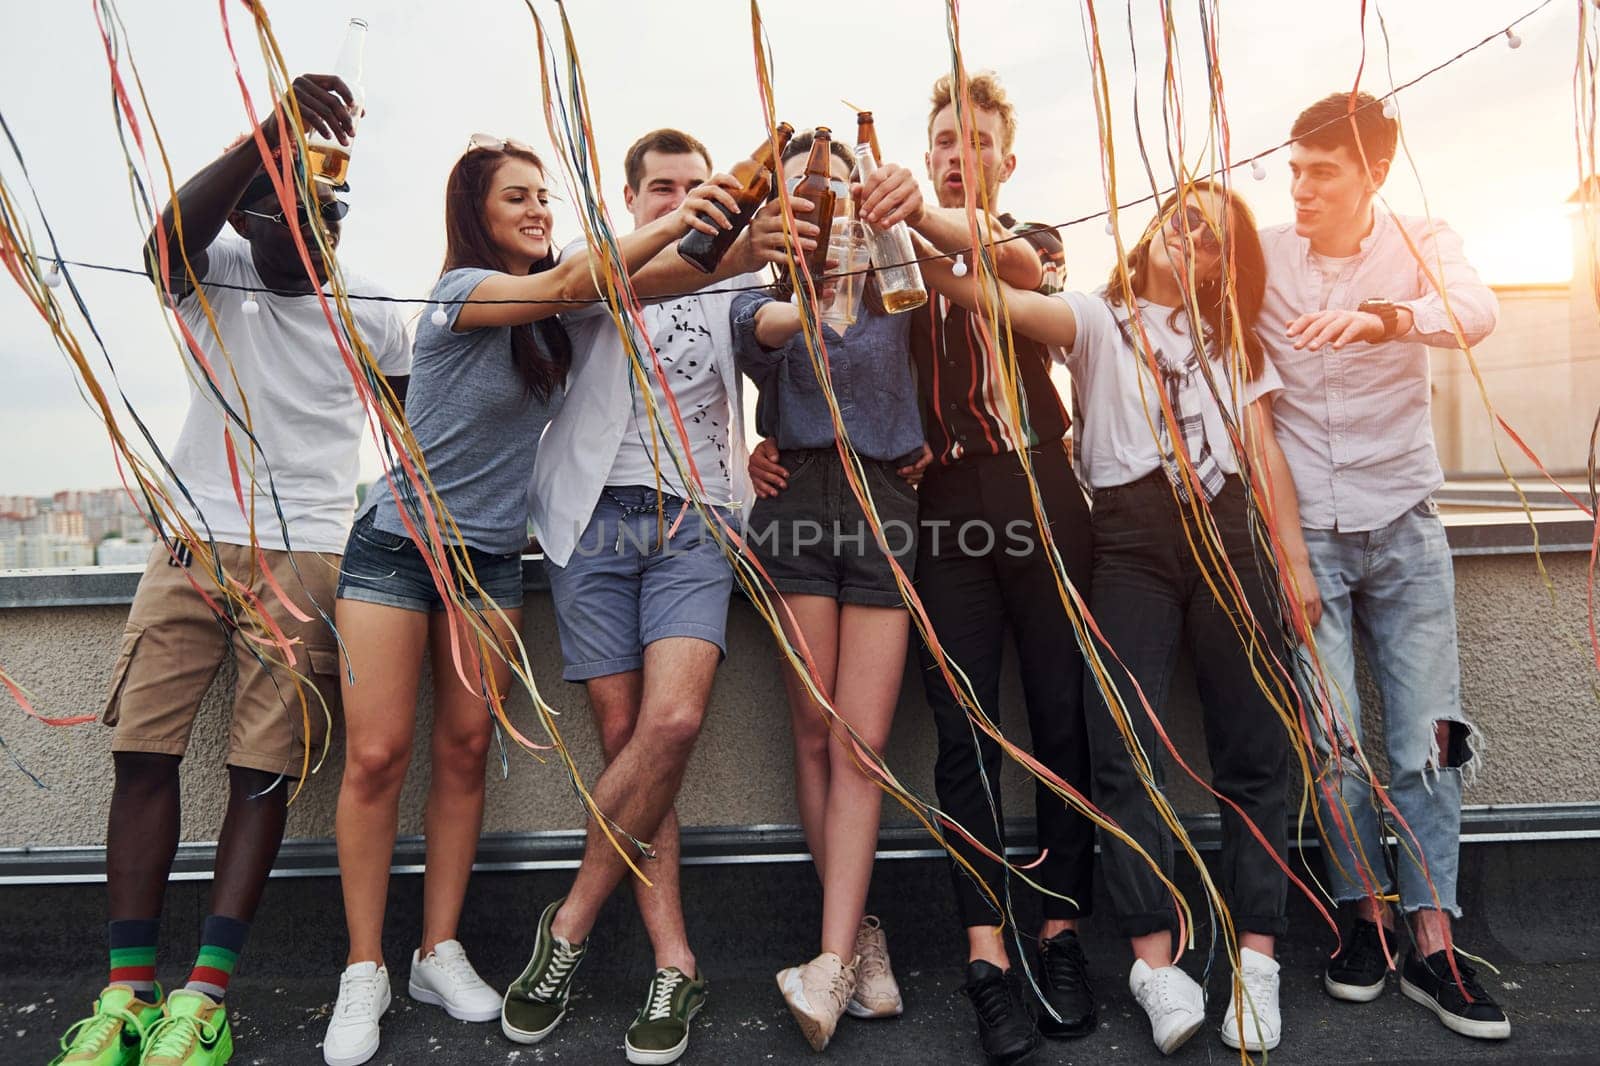 Leaning on the edge of the rooftop with decorates. Group of young people in casual clothes have a party together at daytime.